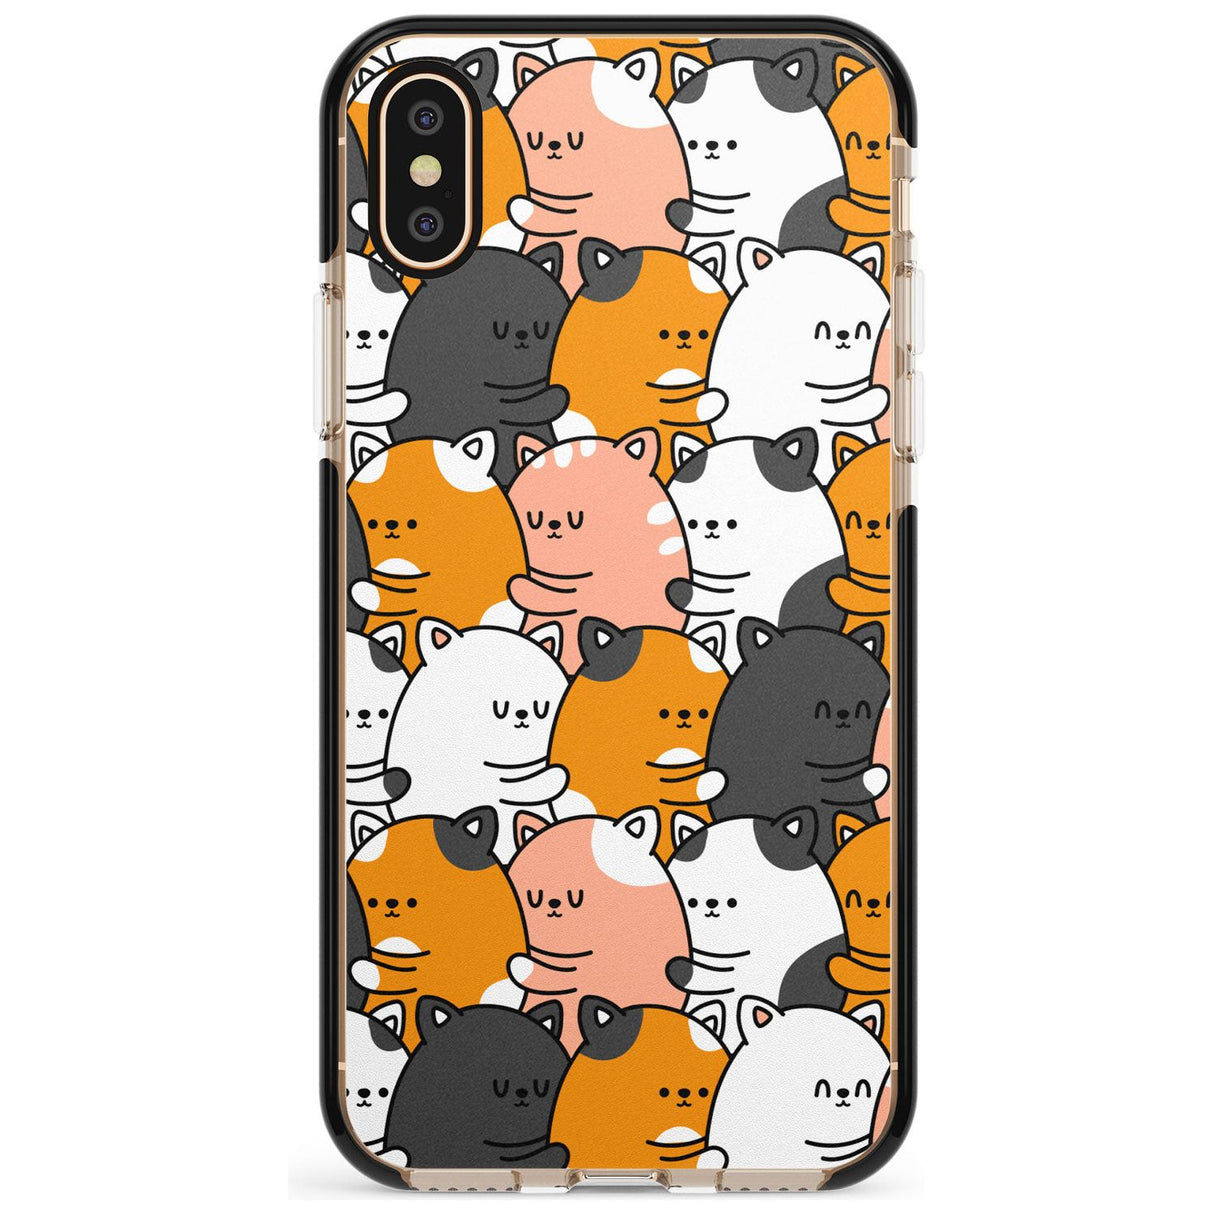 Spooning Cats Kawaii Pattern Black Impact Phone Case for iPhone X XS Max XR